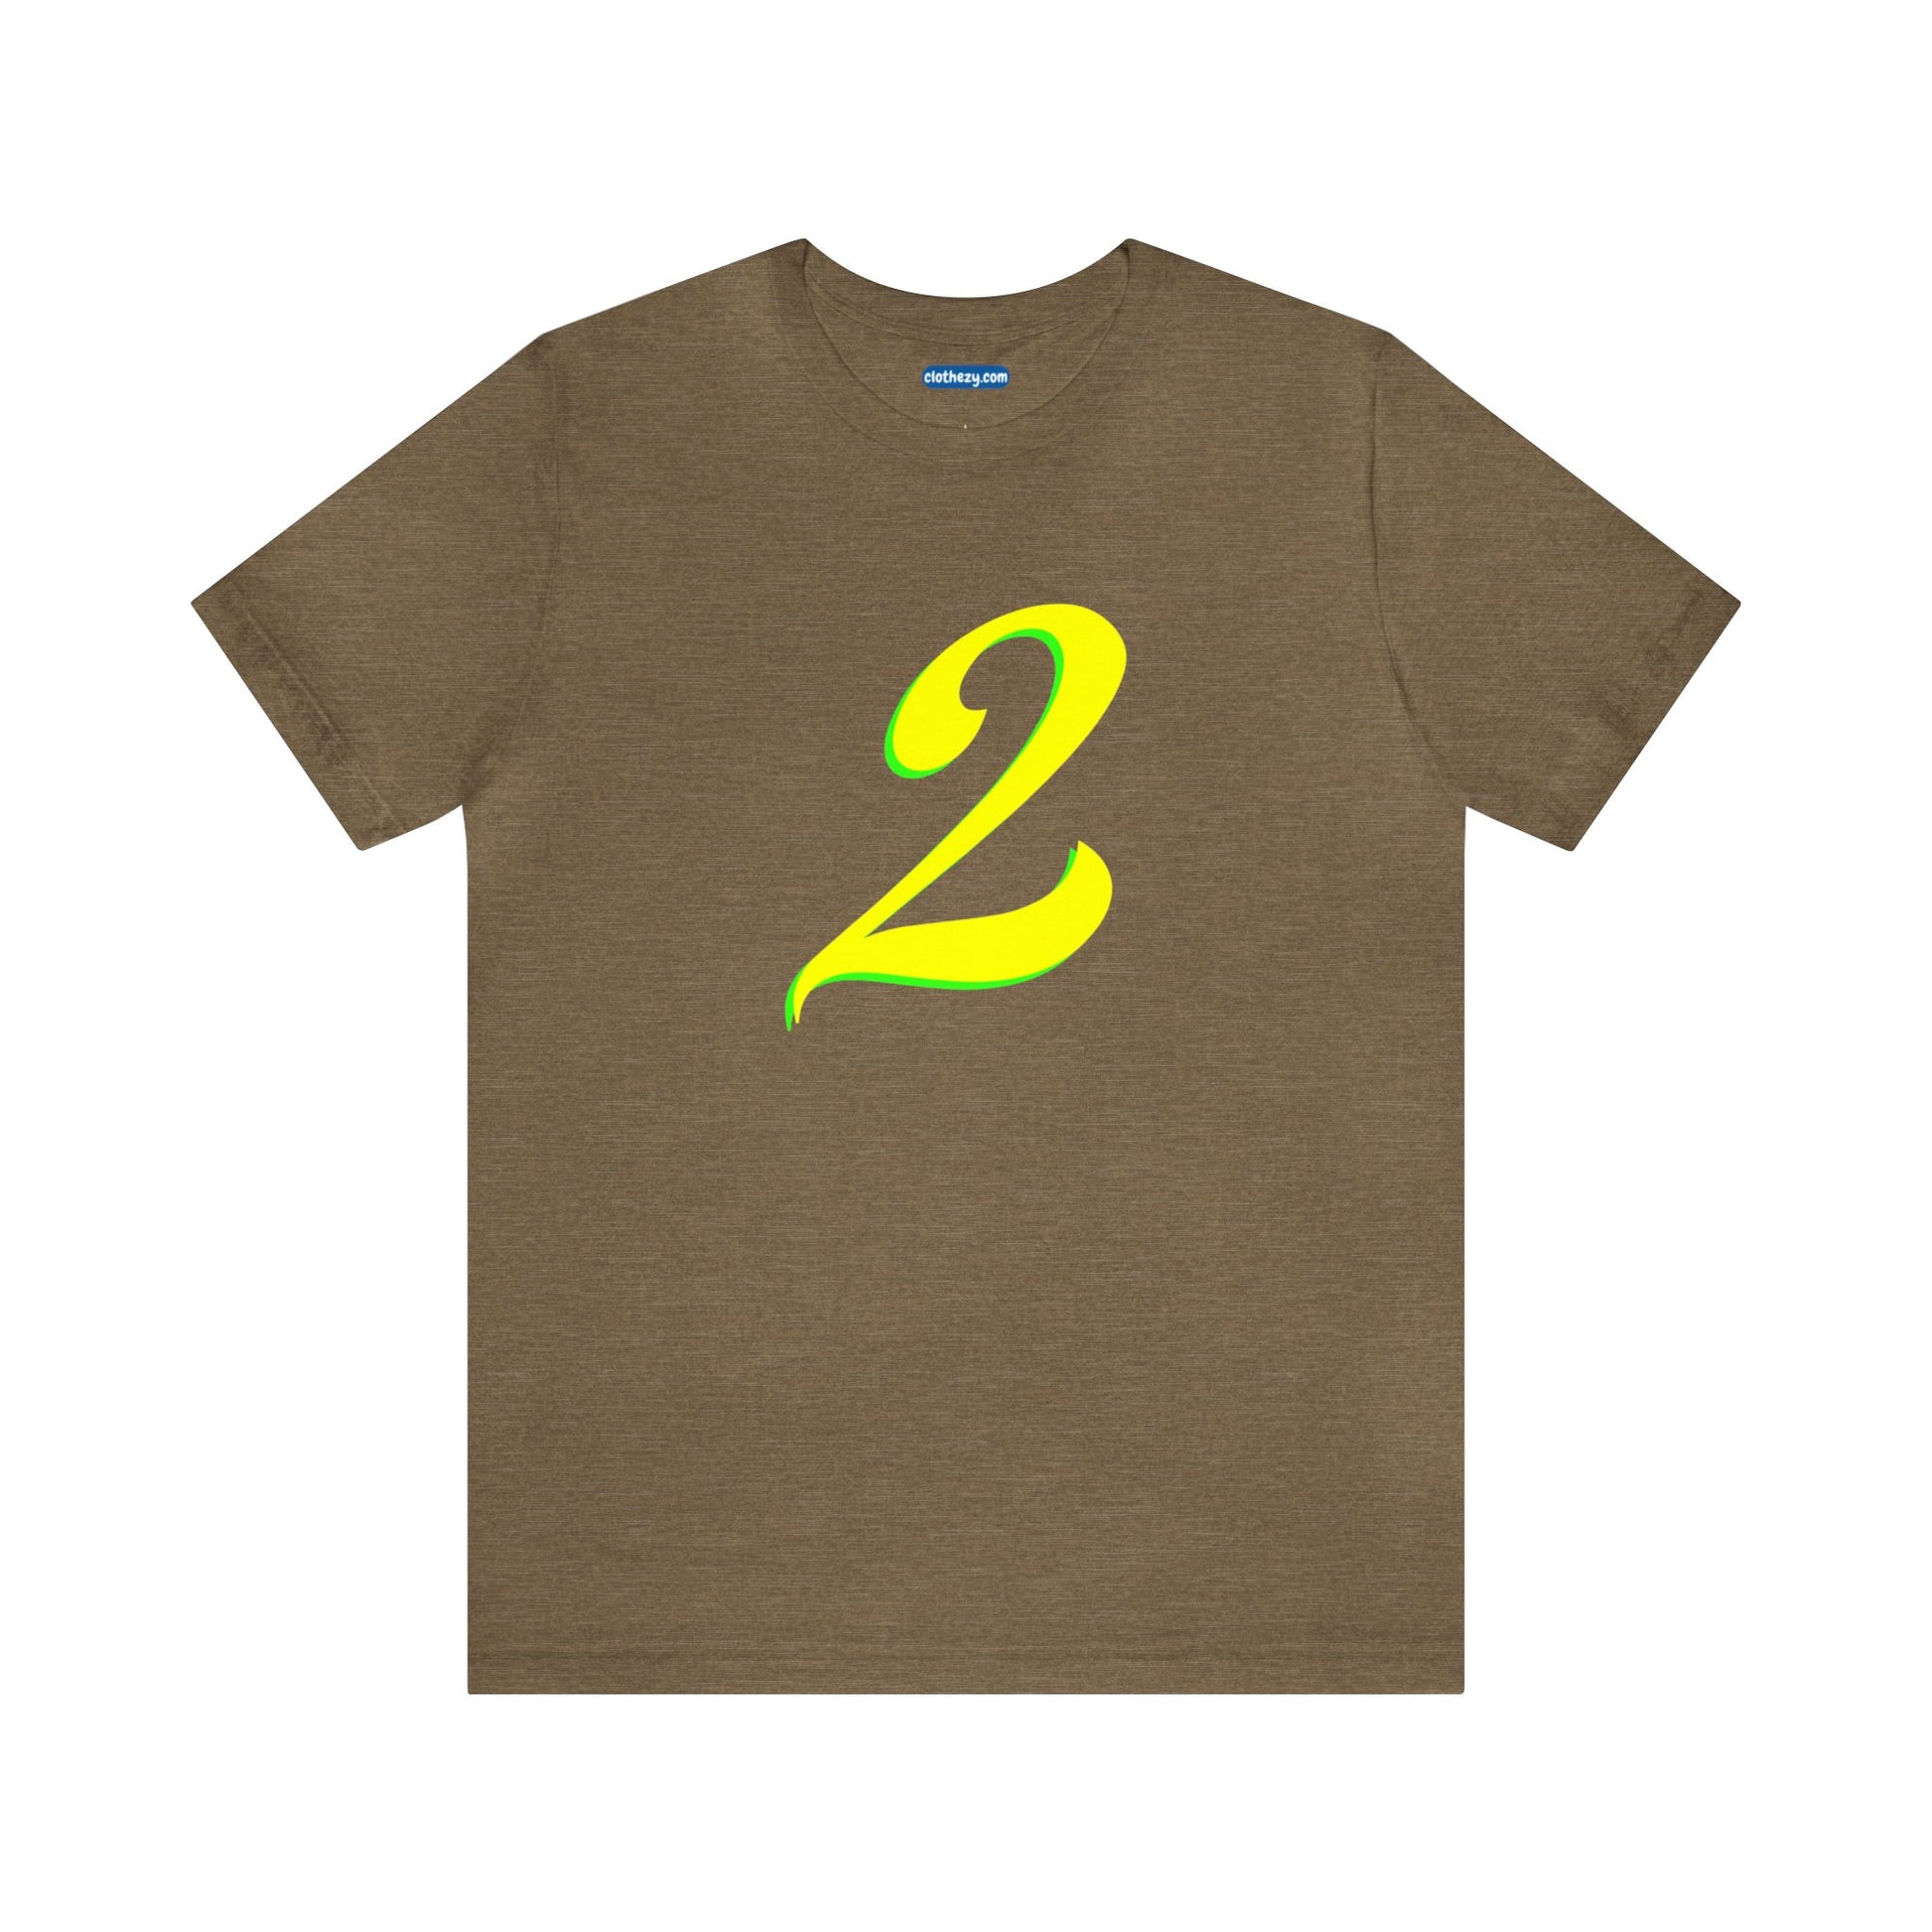 Number 2 Design - Soft Cotton Tee for birthdays and celebrations, Gift for friends and family, Multiple Options by clothezy.com in Olive Heather Size Small - Buy Now